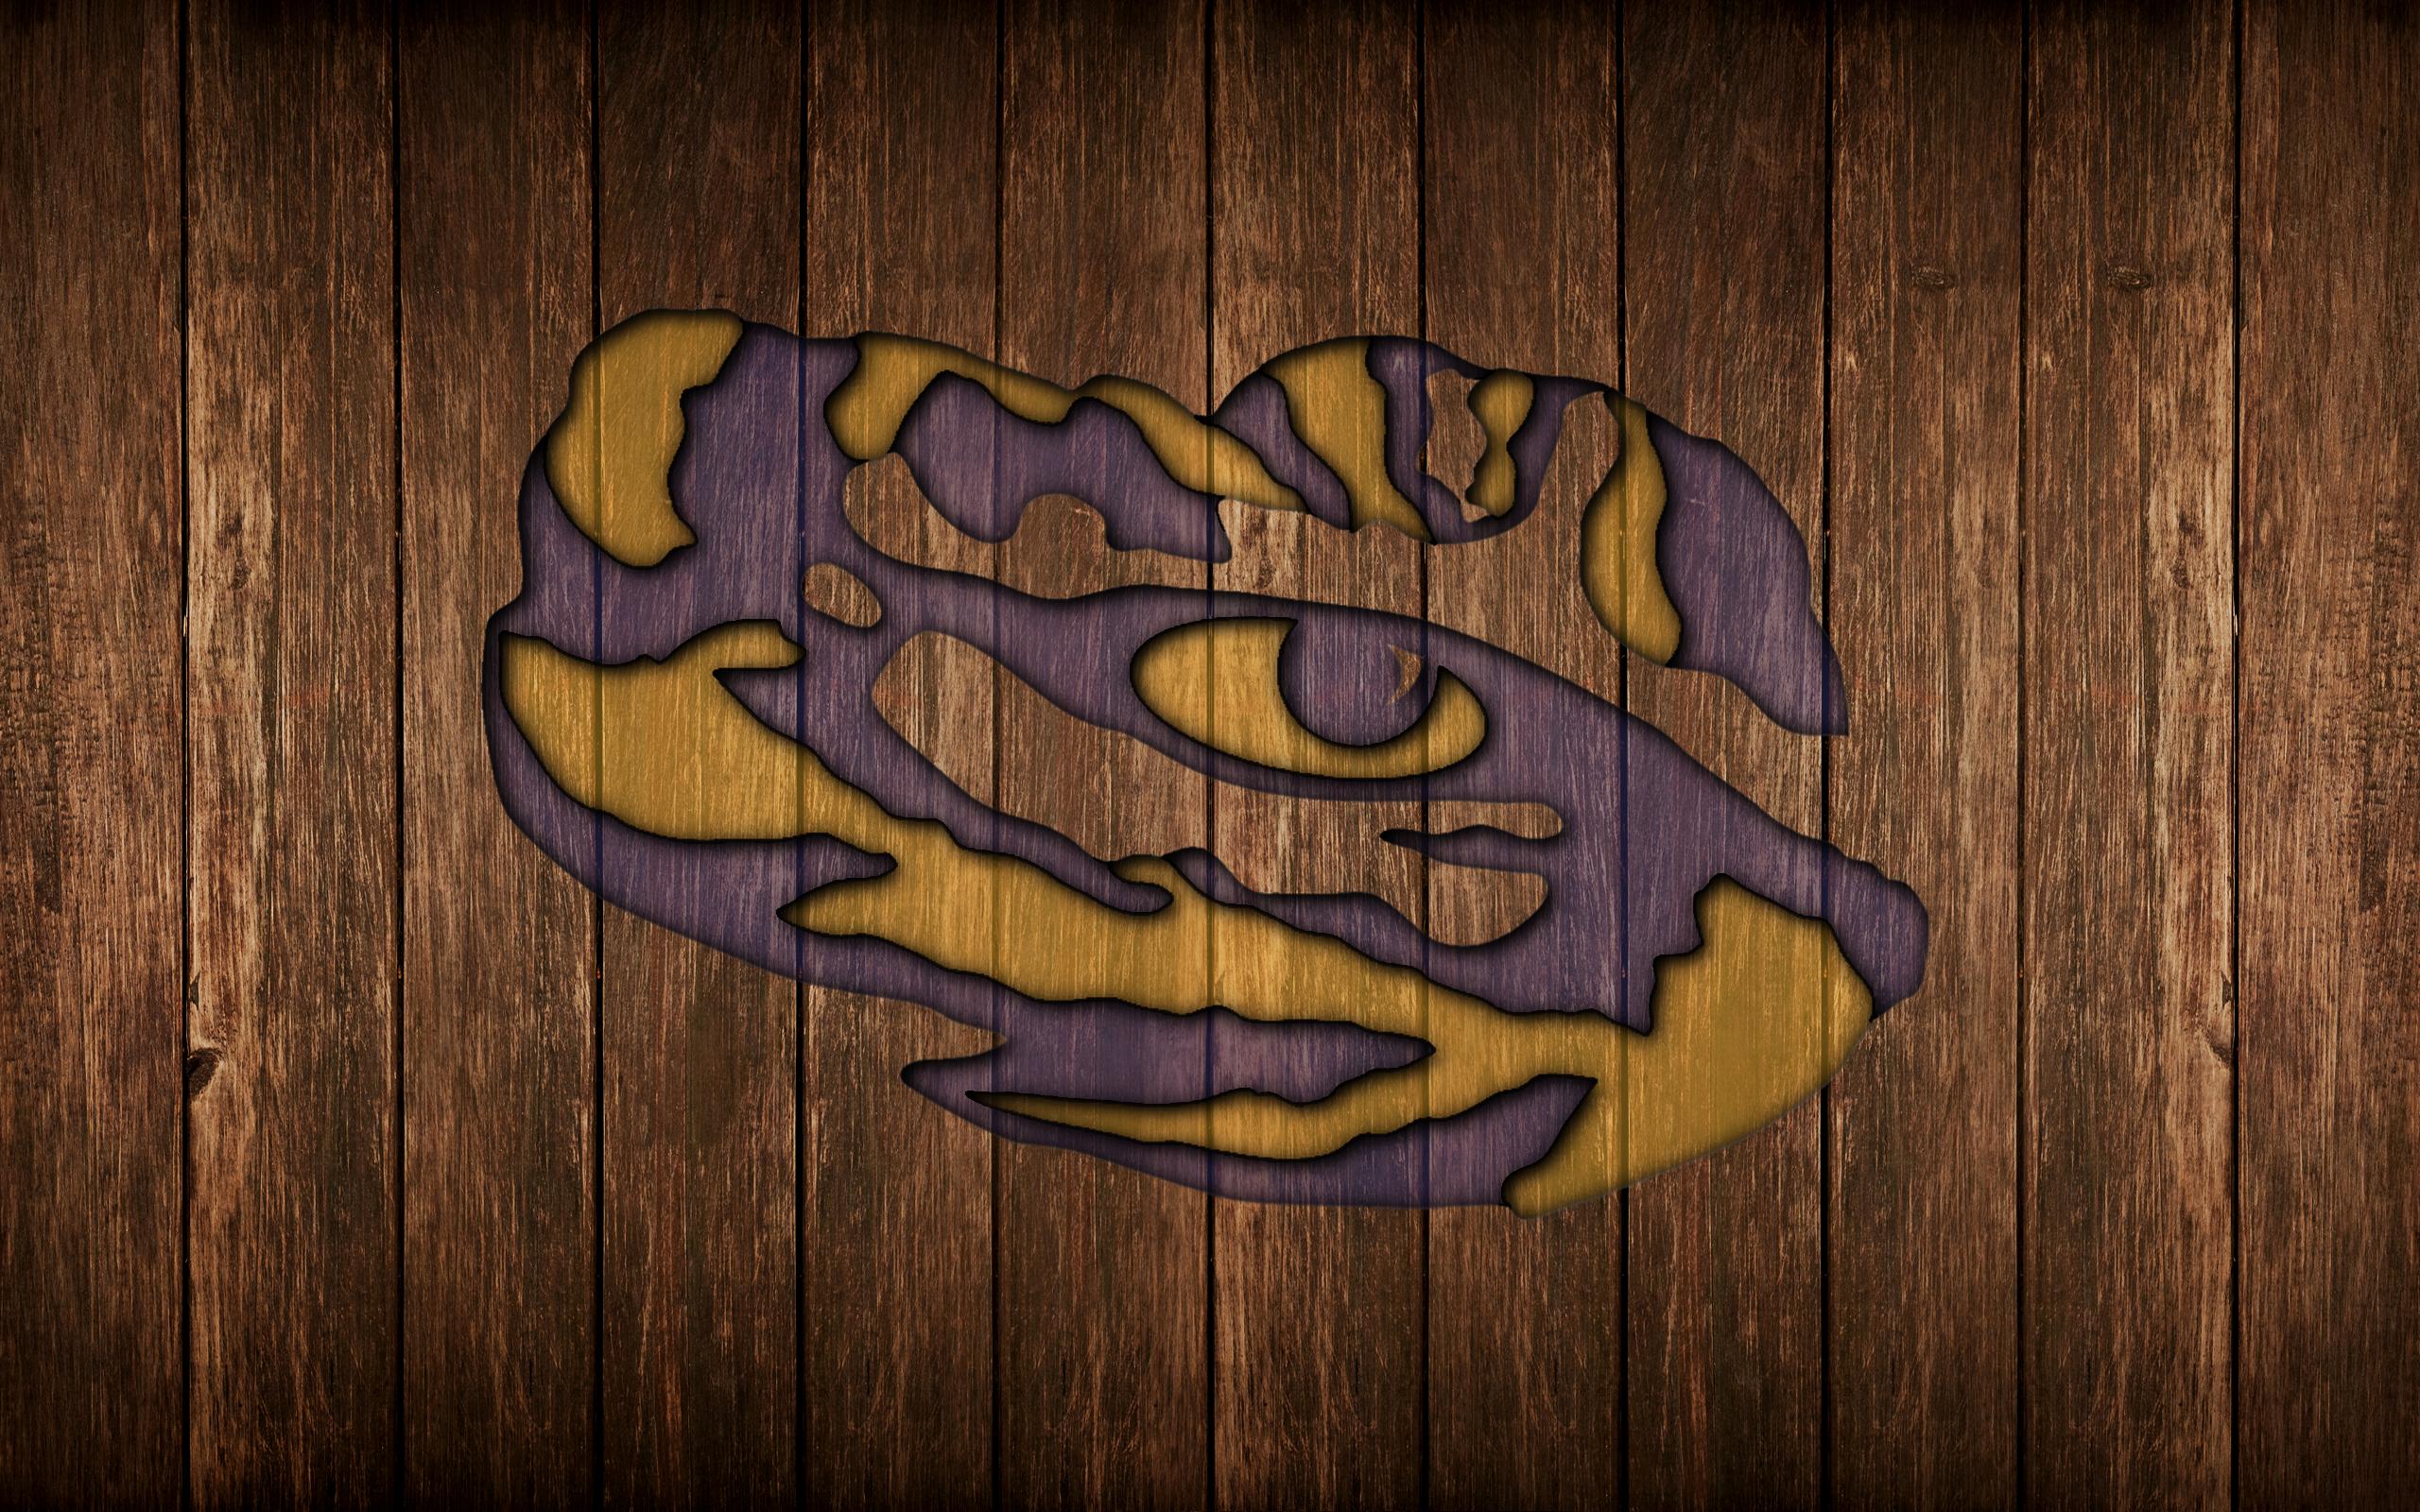 Some New Lsu Wallpaper I Have Been Working On Tigerdroppings